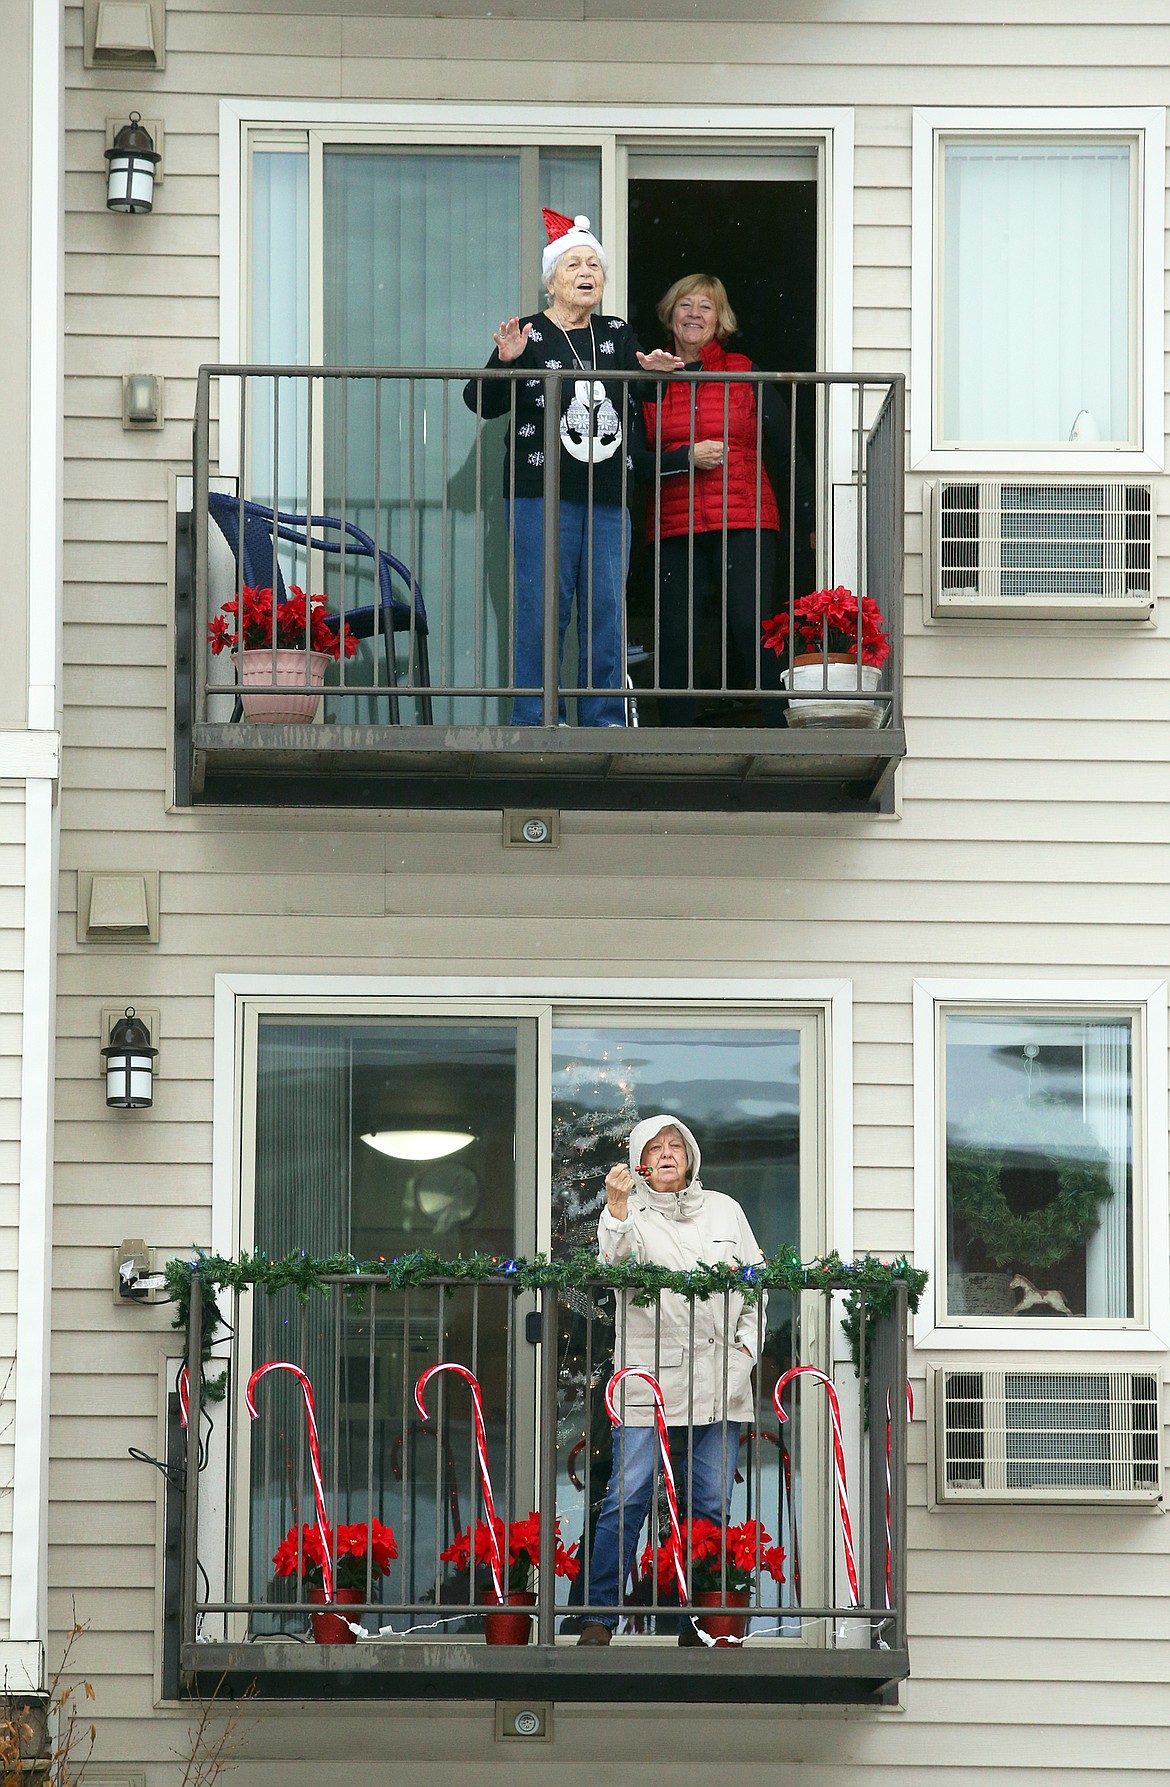 Affinity at Coeur d'Alene residents come out on their balconies to join a Christmas sing-along on Tuesday.